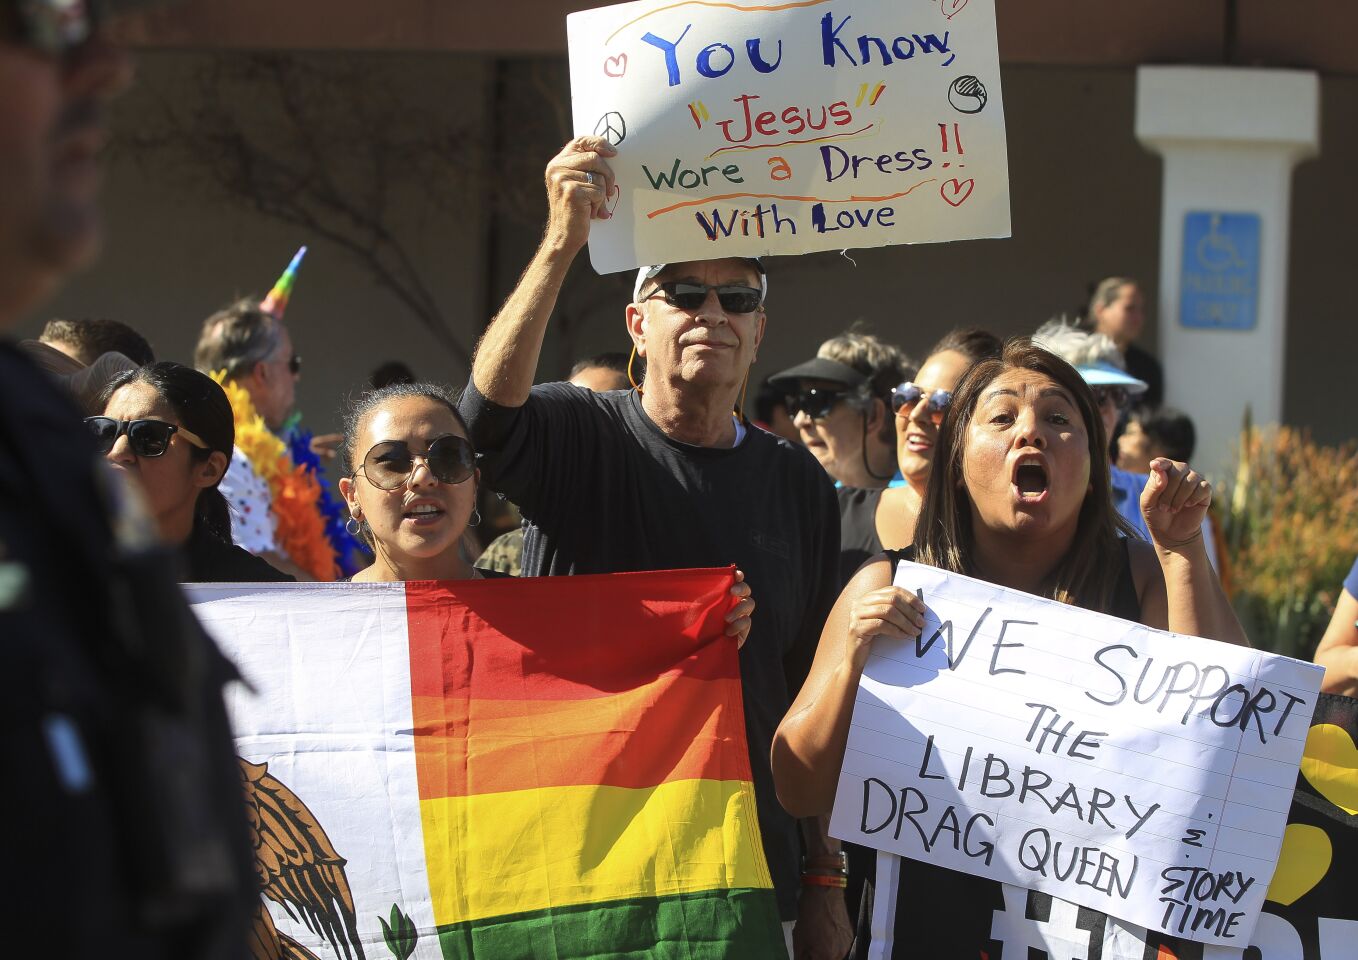 Supporters of the Drag Queen Story Hour yells at protesters against the story hour at the Chula Vista Public Library, Civic Center Branch, on Tuesday, September 10, 2019 in Chula Vista, California.